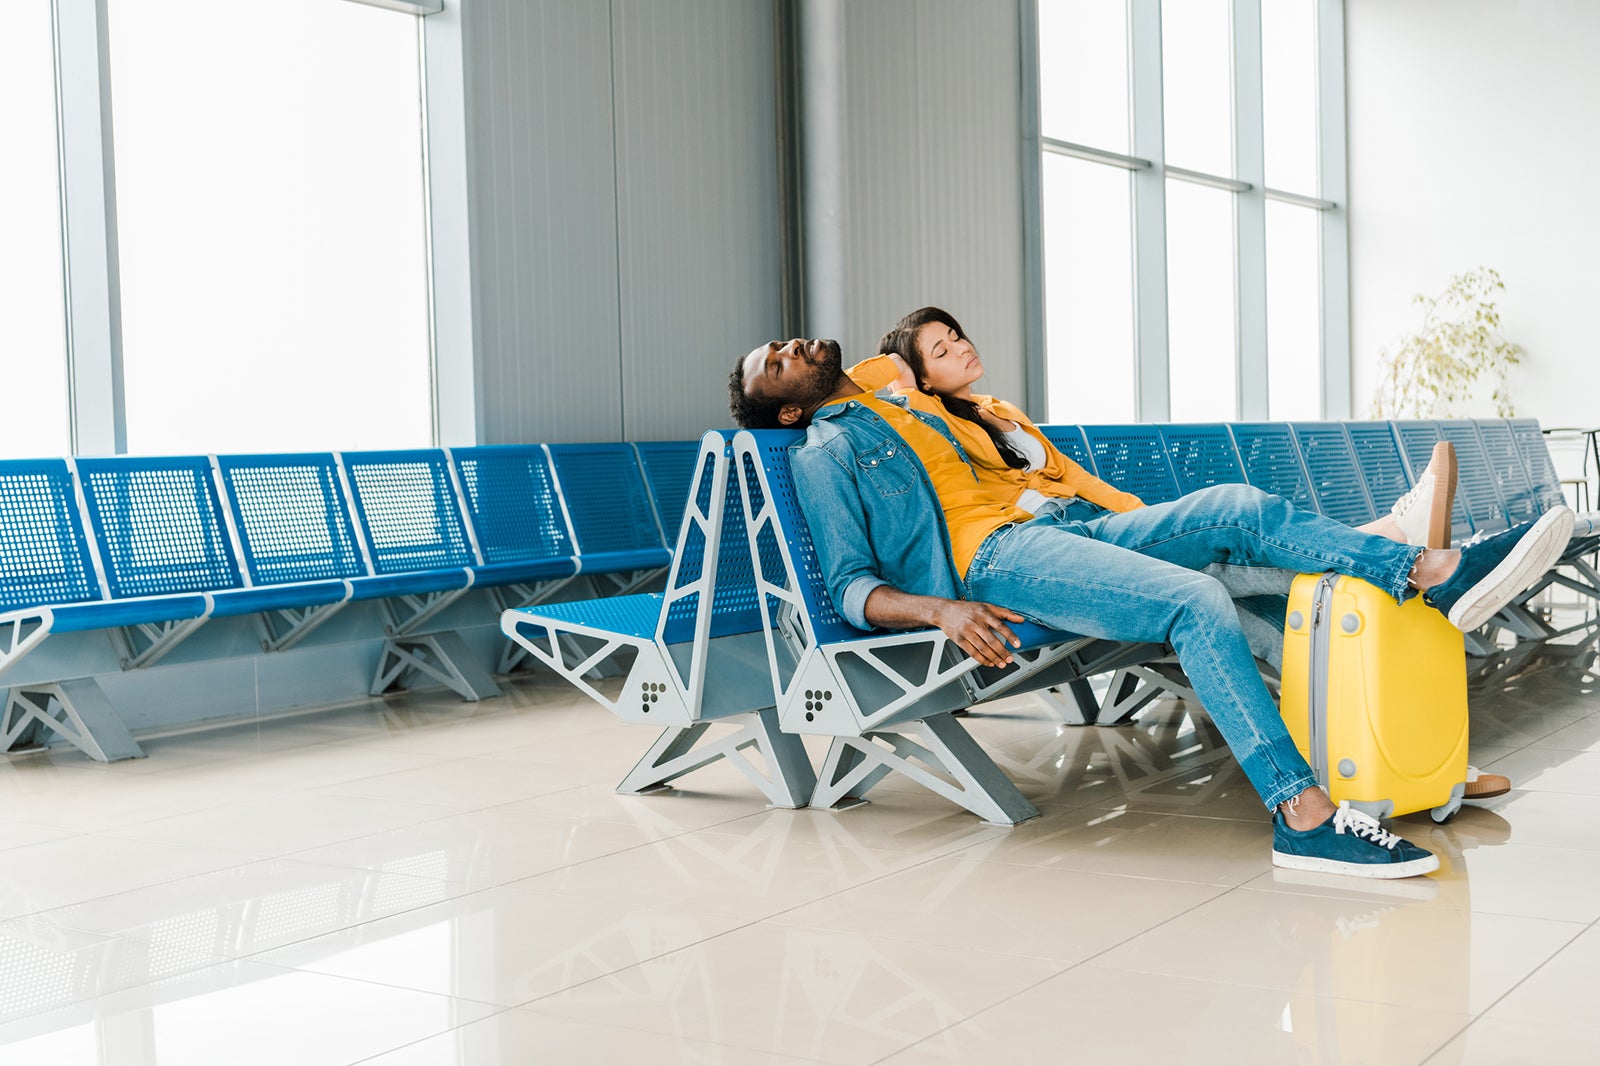 Can I sleep in the airport if I have an early flight?